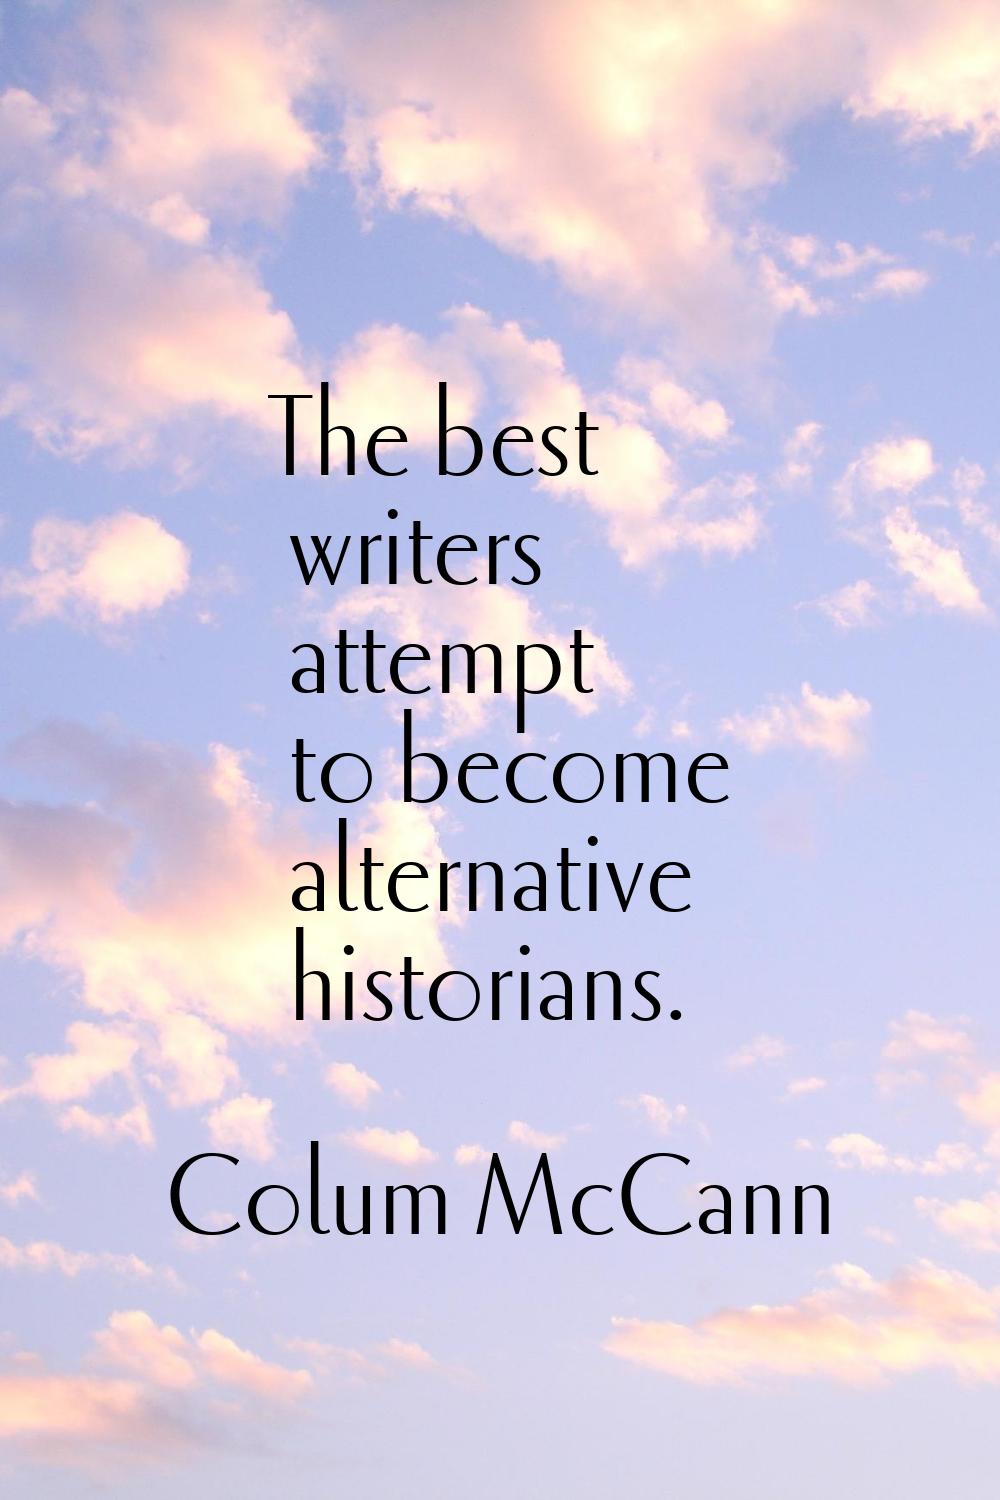 The best writers attempt to become alternative historians.